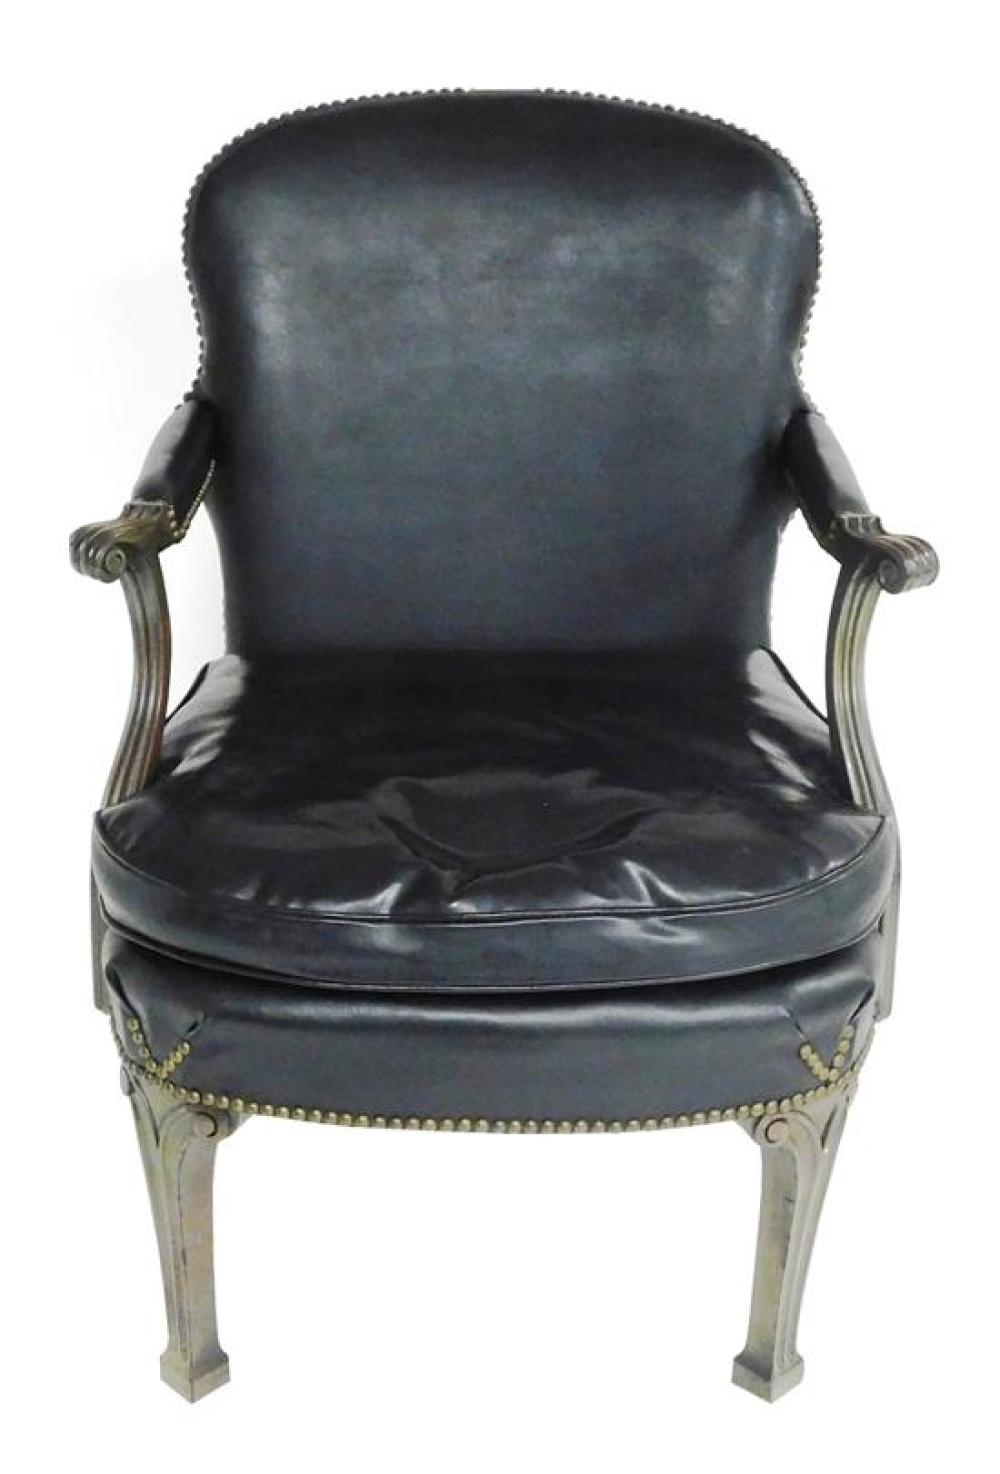 ENGLISH STYLE LIBRARY CHAIR, BLACK